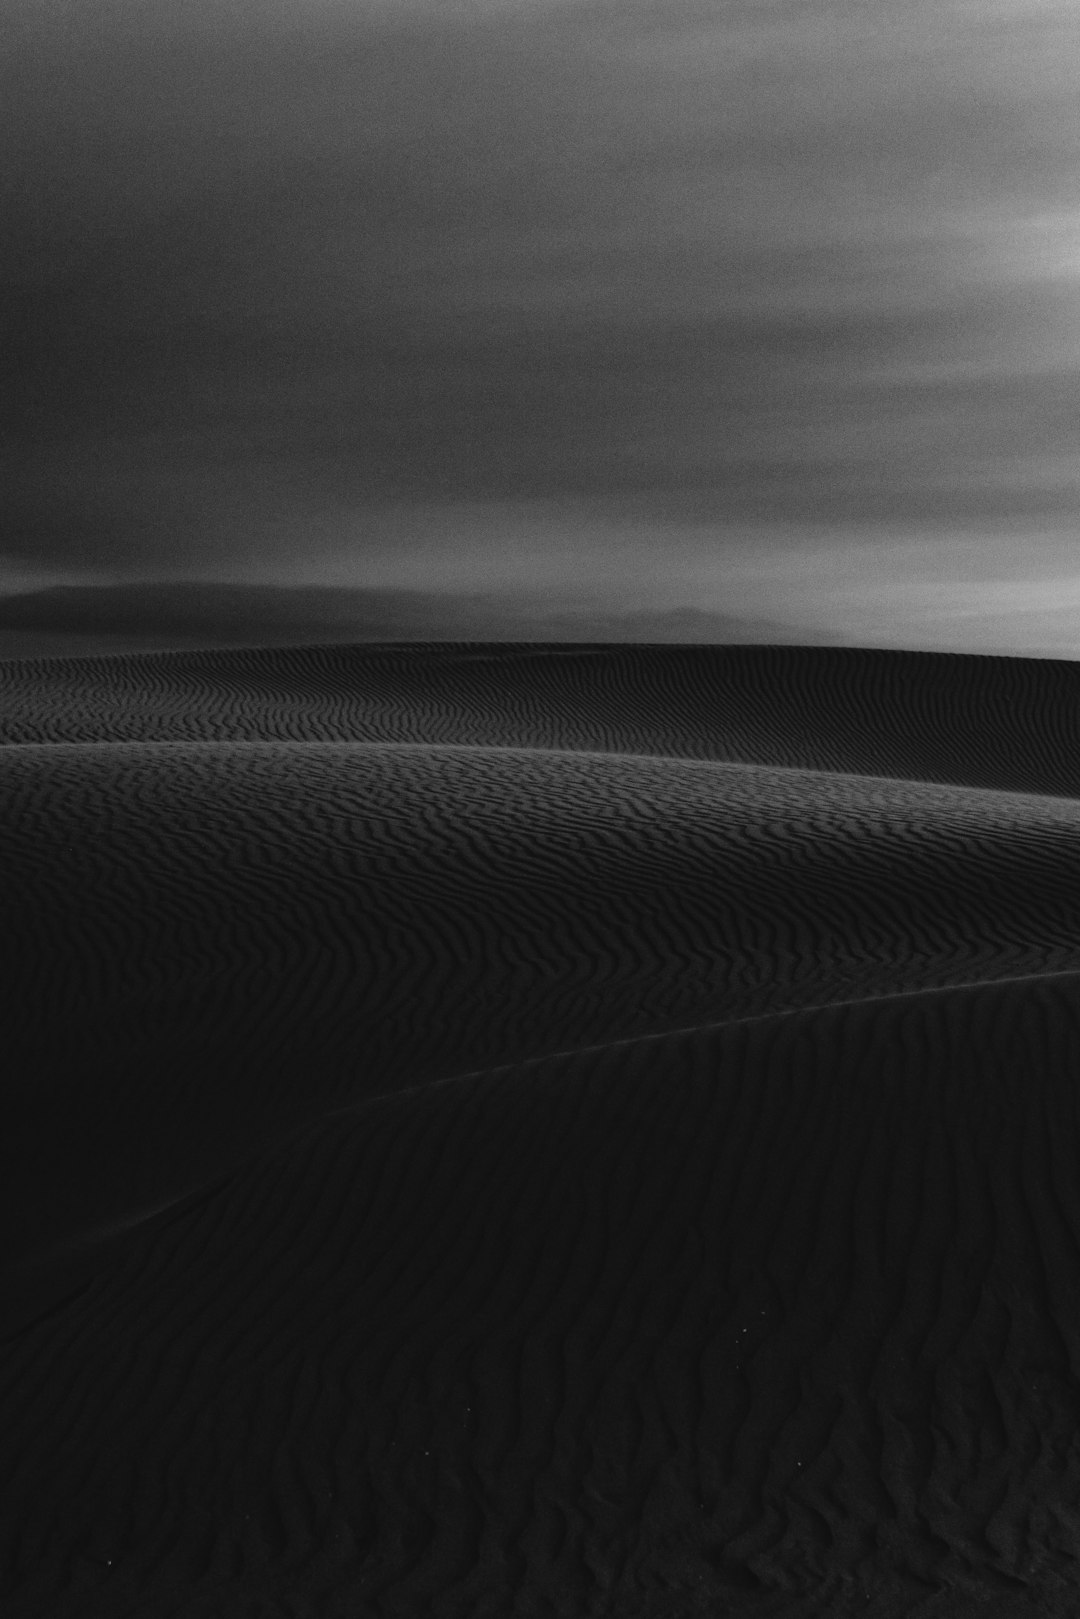 grayscale photo of desert under cloudy sky